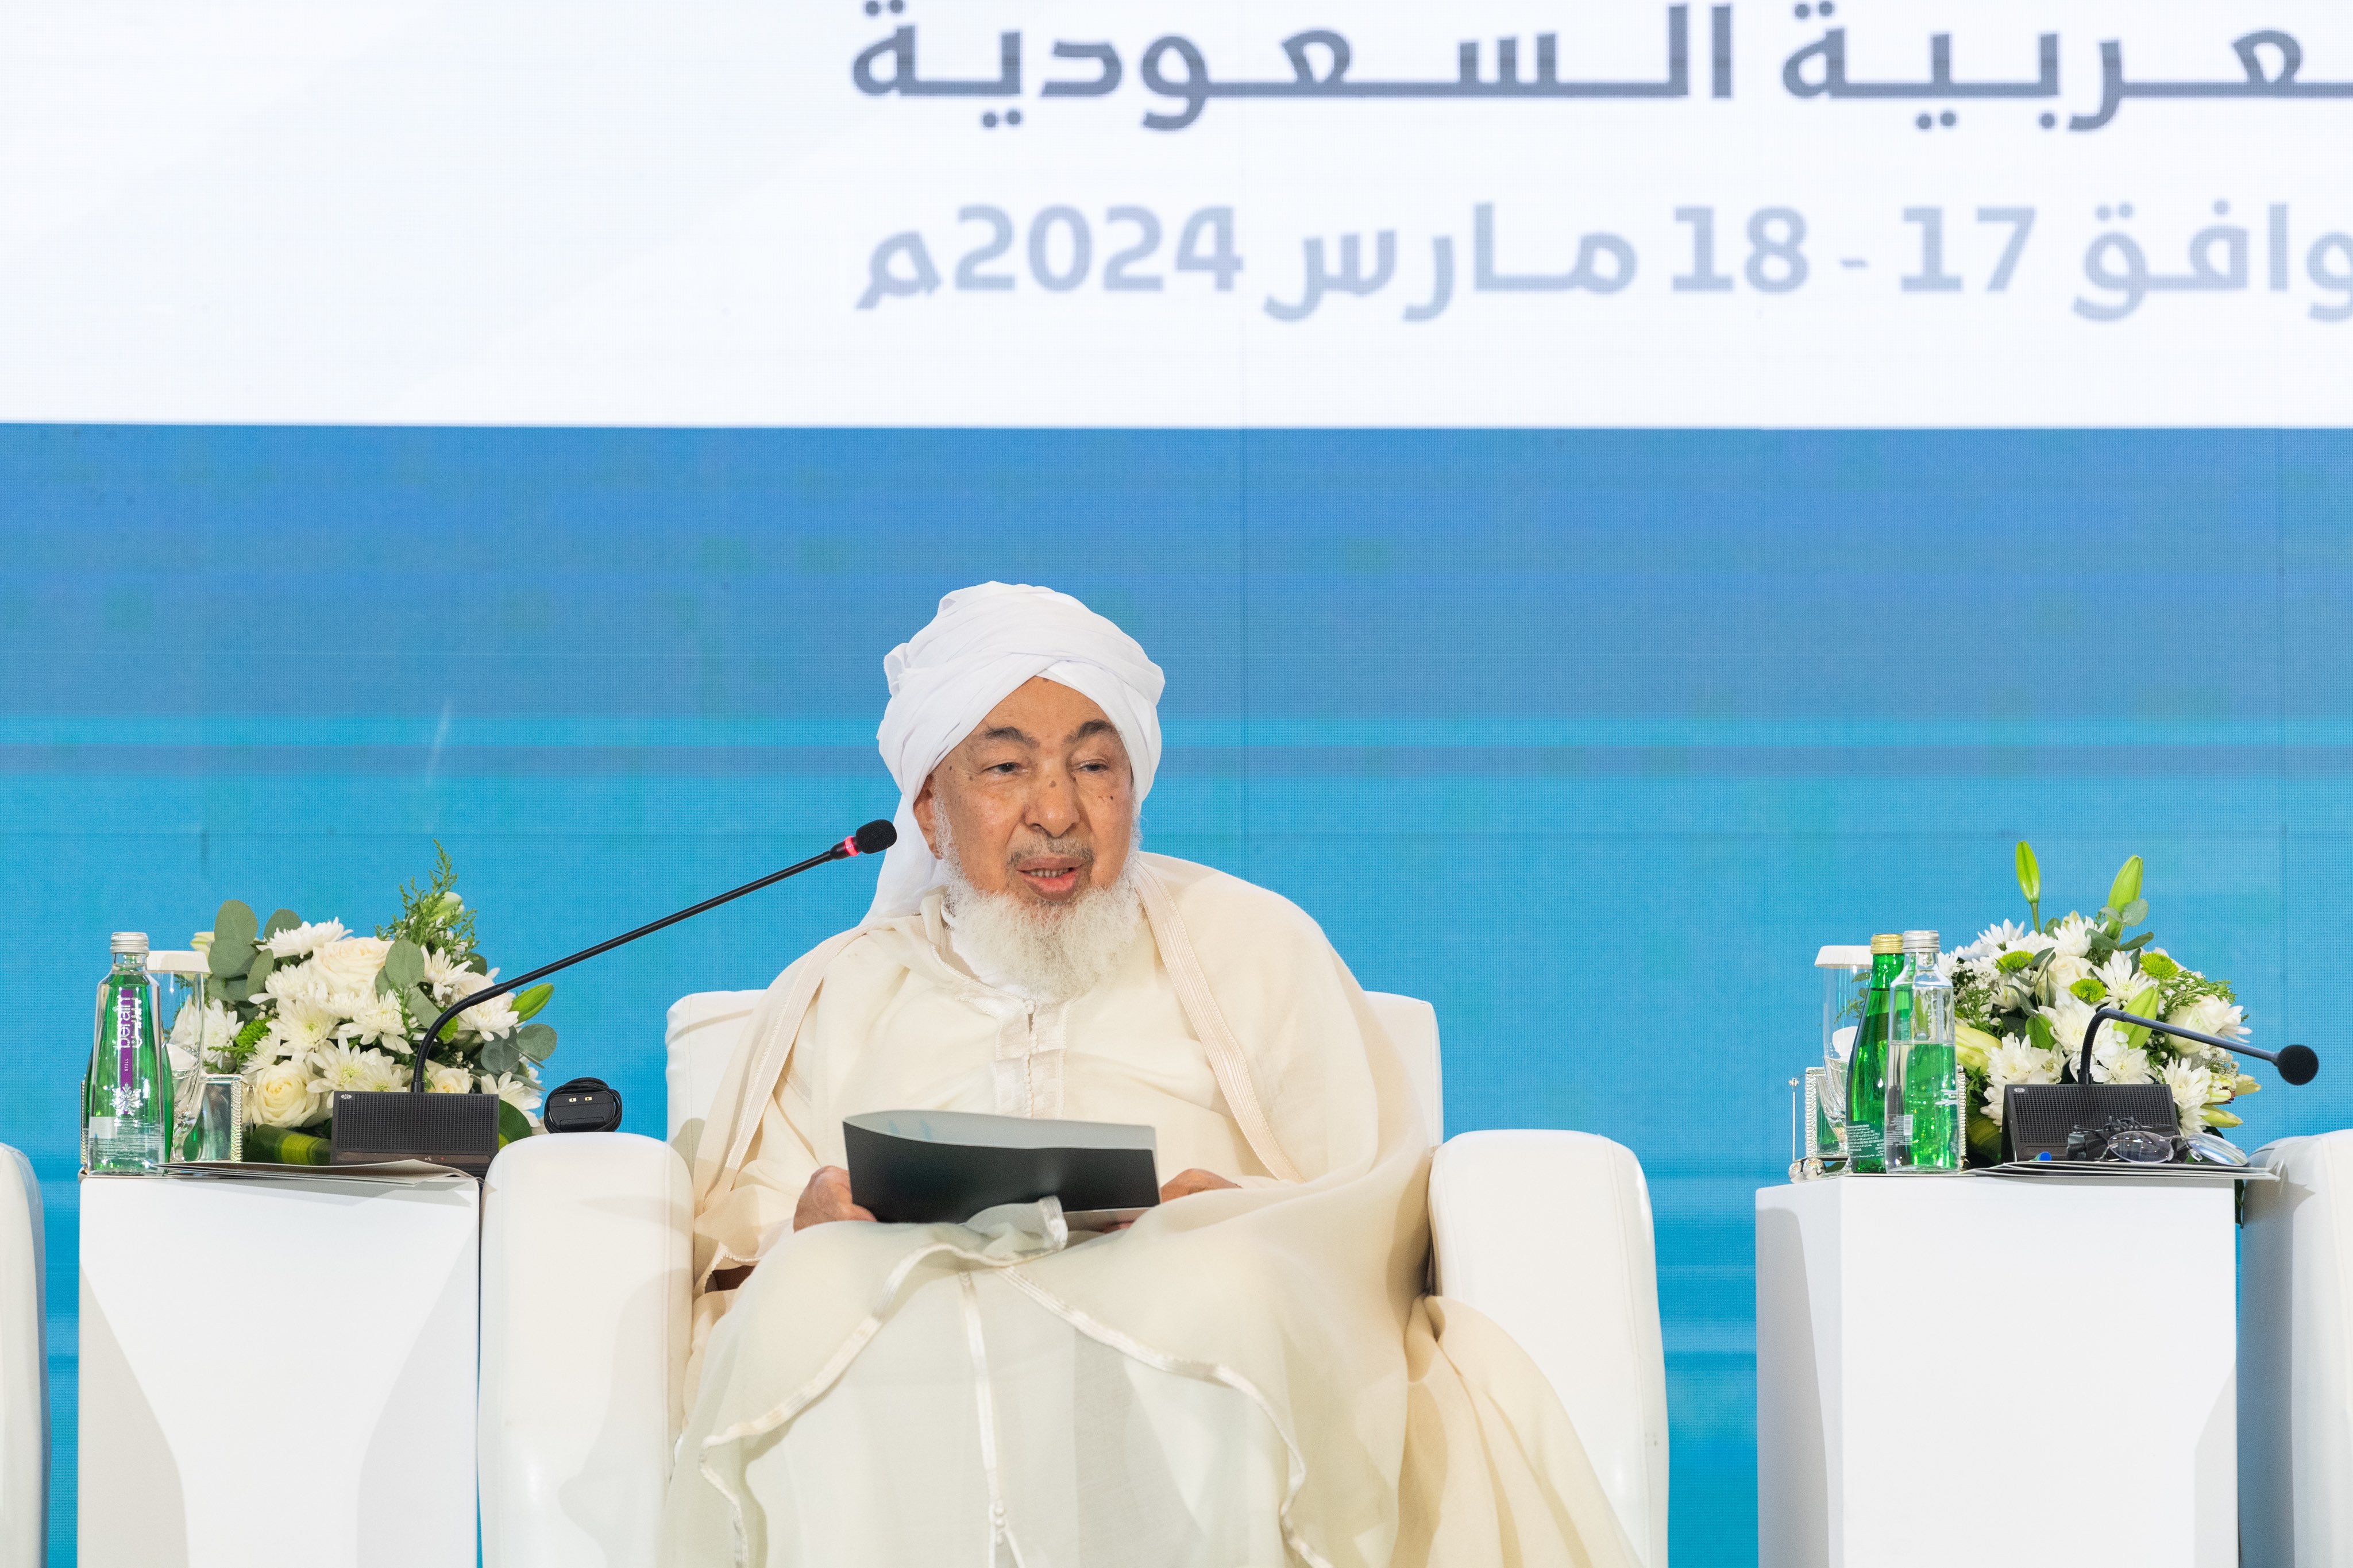 His Eminence Sheikh Abdullah bin ‎Mahfudh bin Bayyah, Chairman of the Emirates Council for Sharia ‎Fatwa, at the opening ceremony at the Global Conference for Building Bridges between Islamic Schools of Thought and Sects: